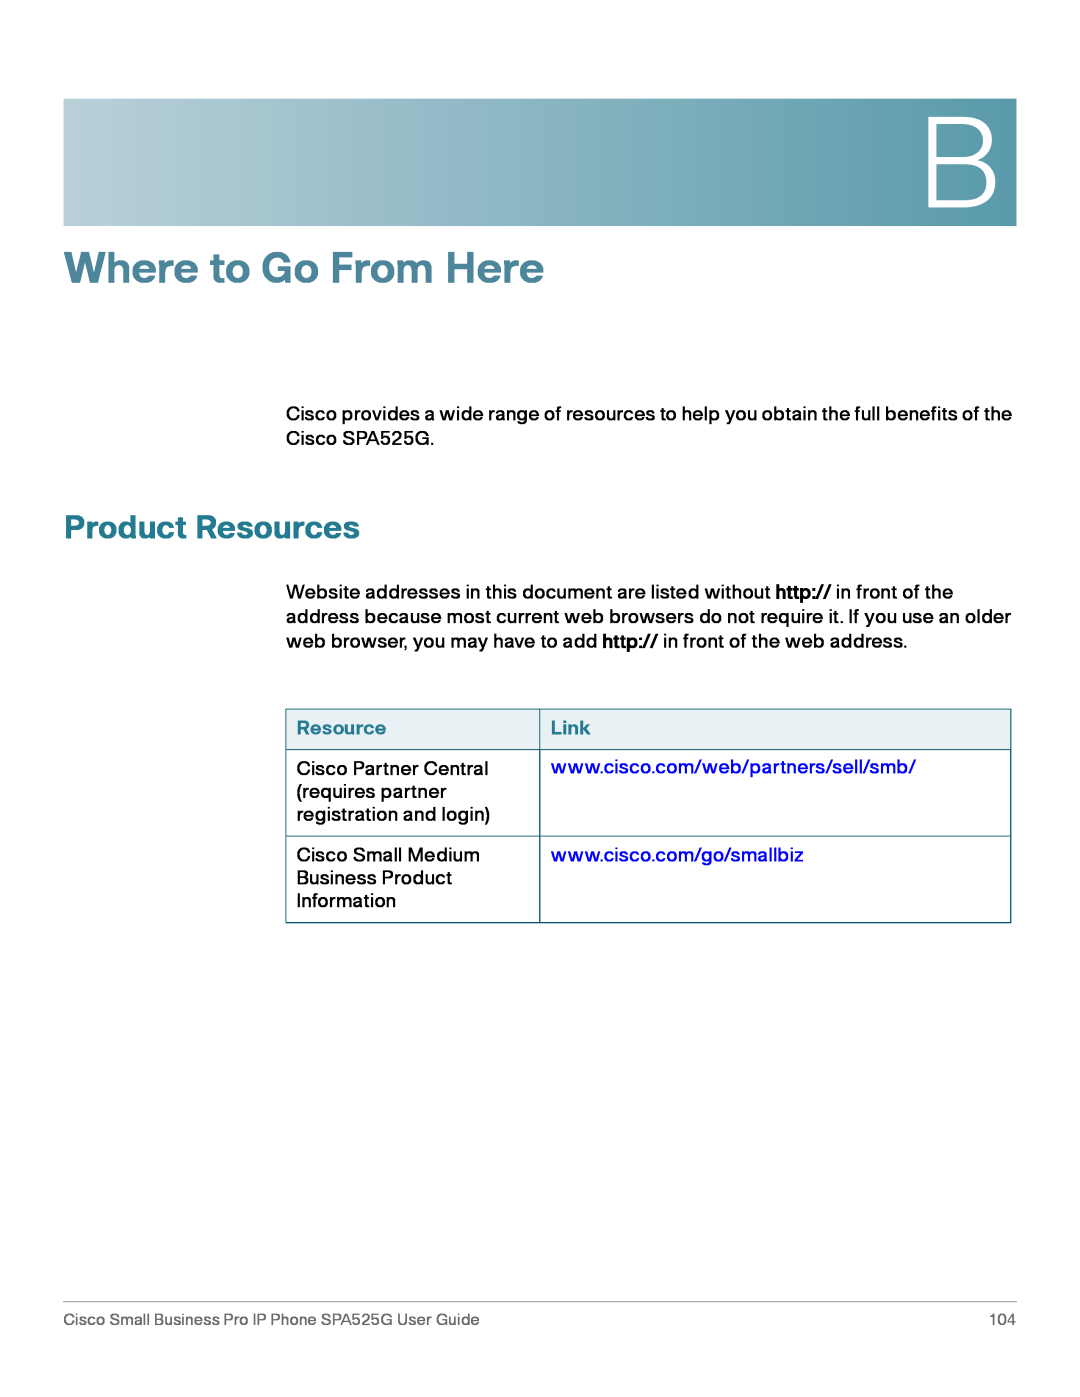 Cisco Systems SPA525G manual Where to Go From Here, Product Resources, Link 